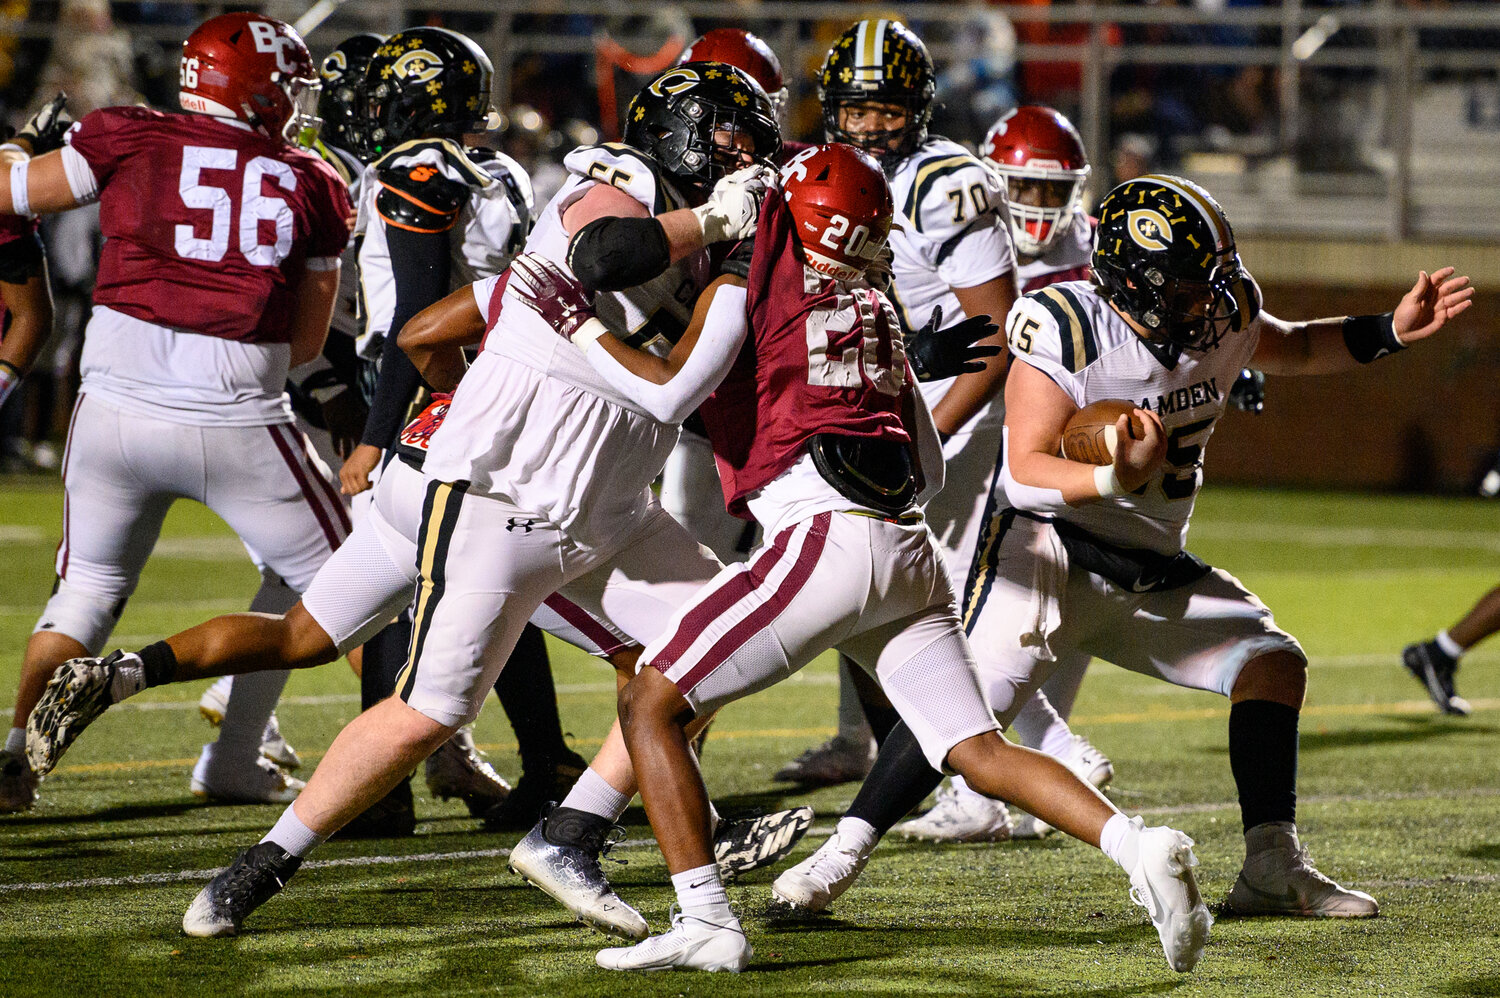 Brookland-Cayce lost 46-30 to Camden in the 3A Upper State title game.